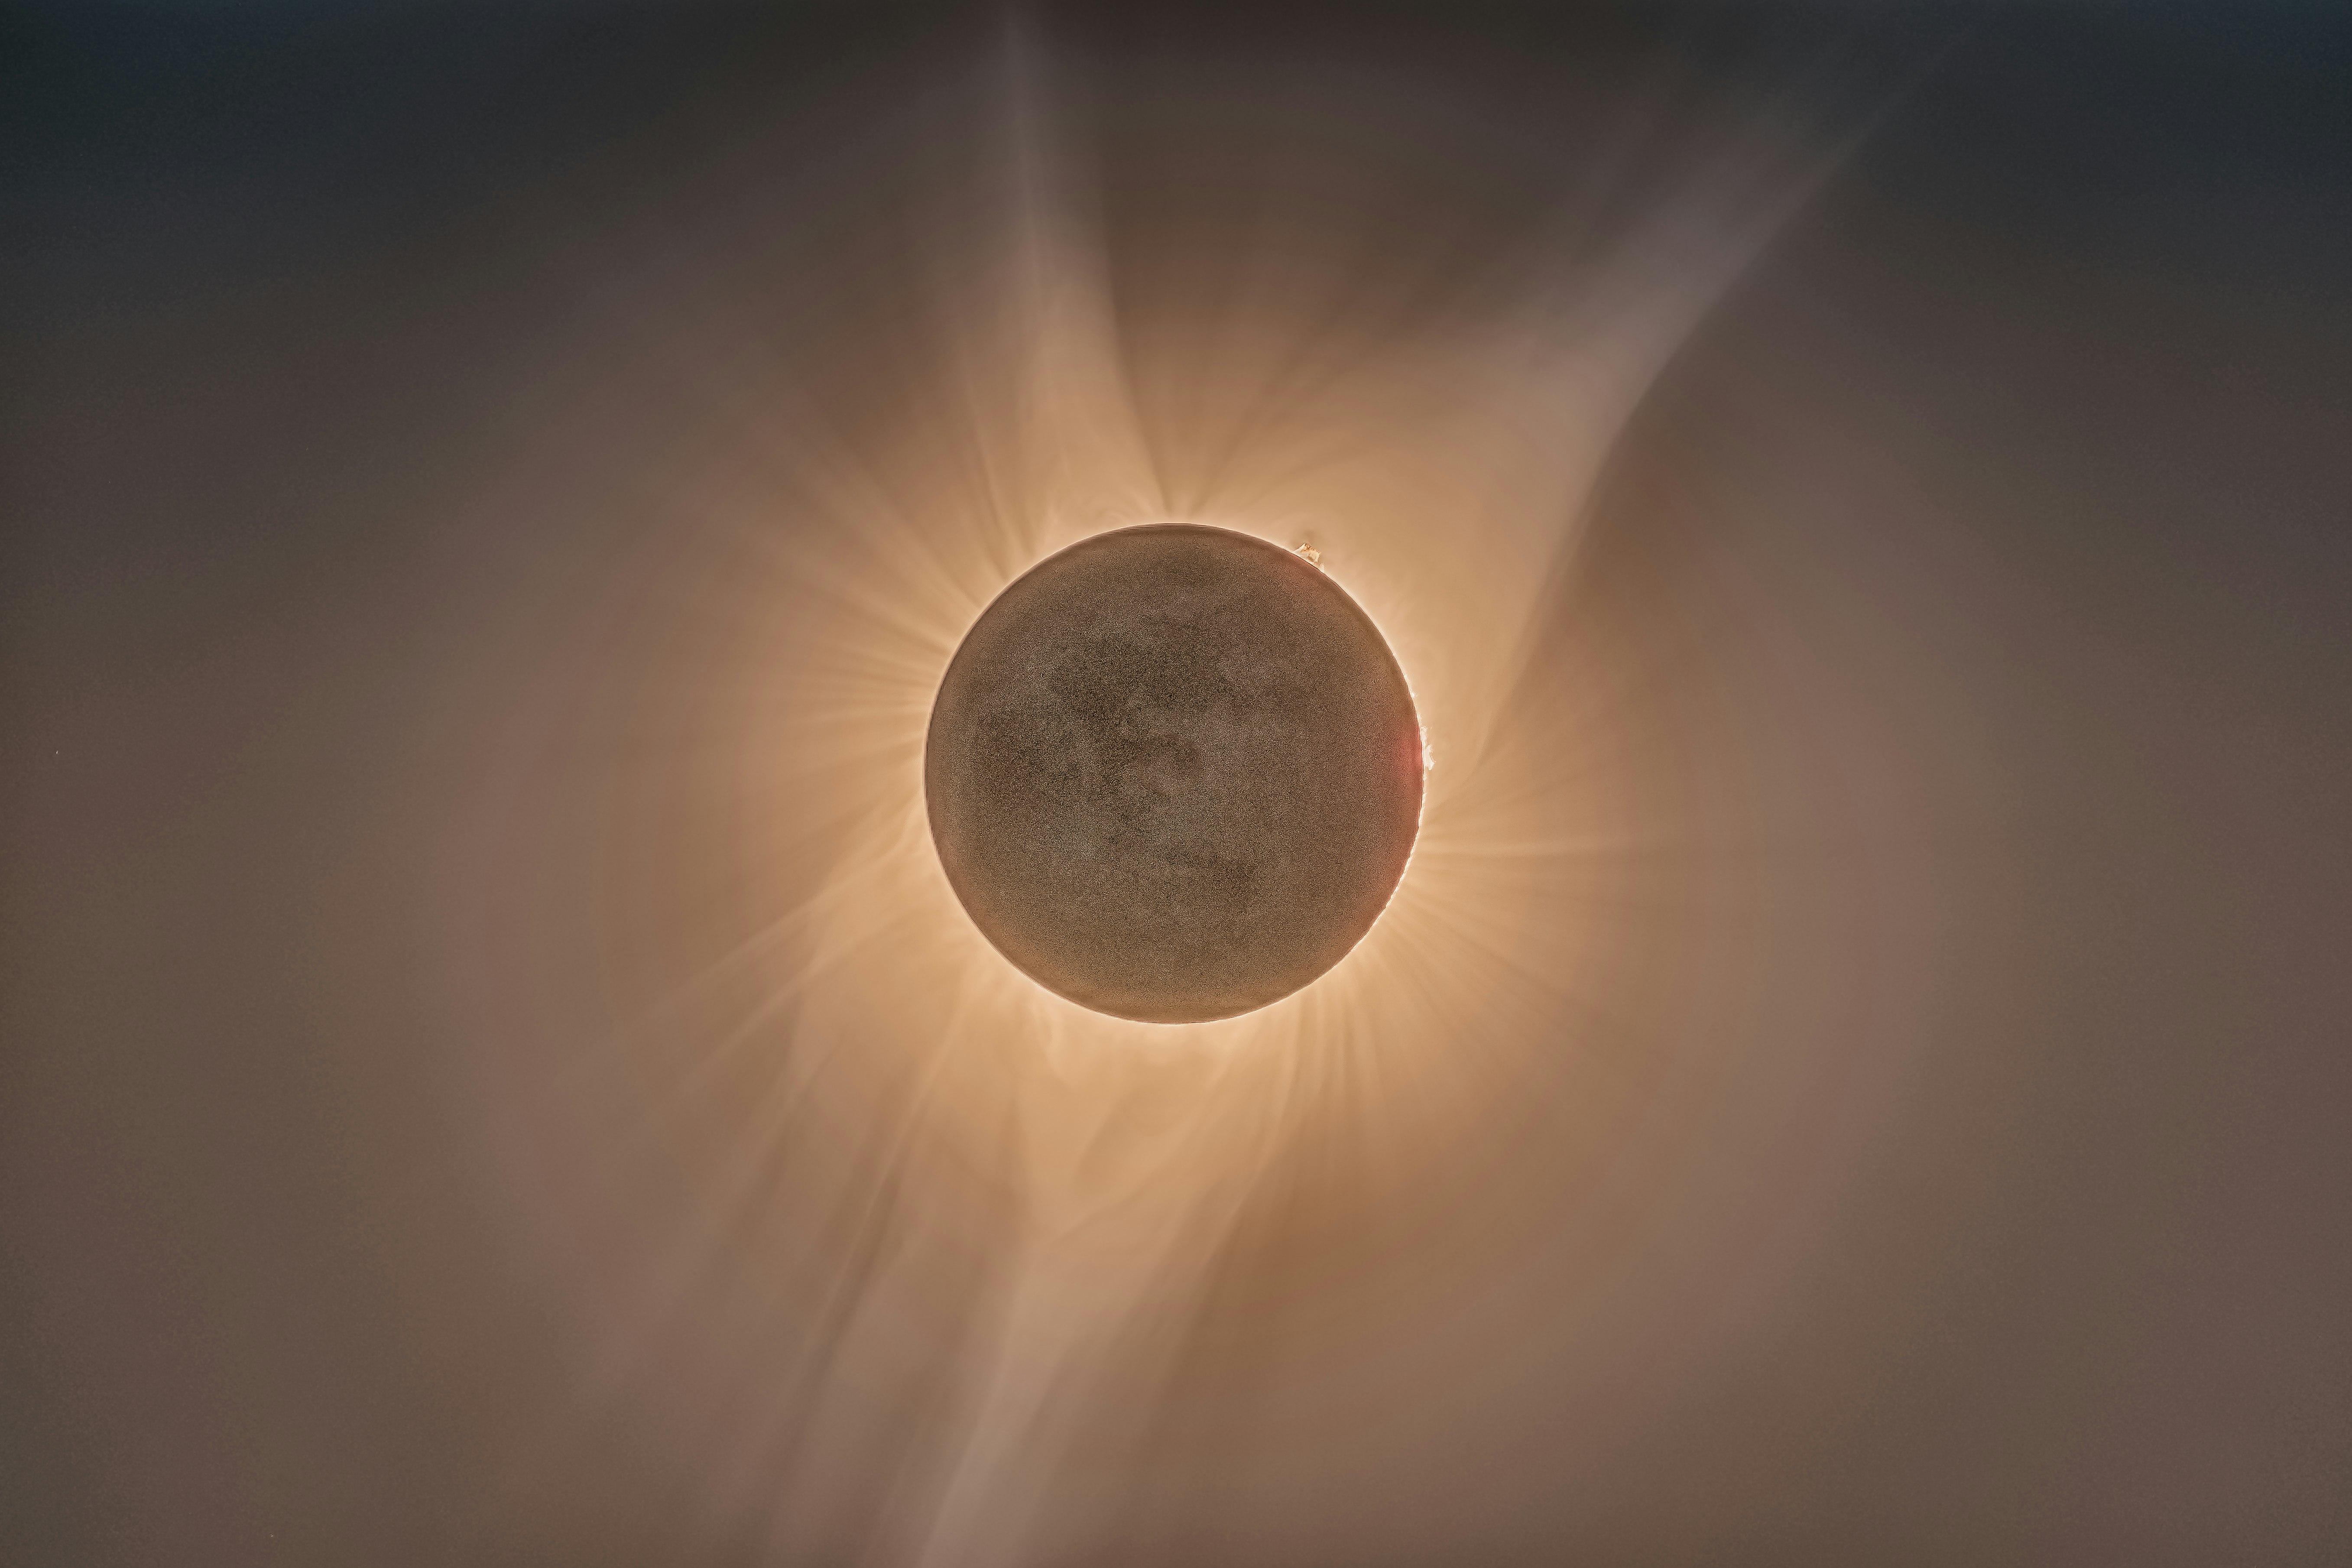 Here is an HDR photo of the eclipse. This seven images merged into one to bring out the lunar details and to show the corona of the sun. This was such an epic day and I still can’t believe it is real! I’m on IG @bryangoffphoto Stop by and say hi!